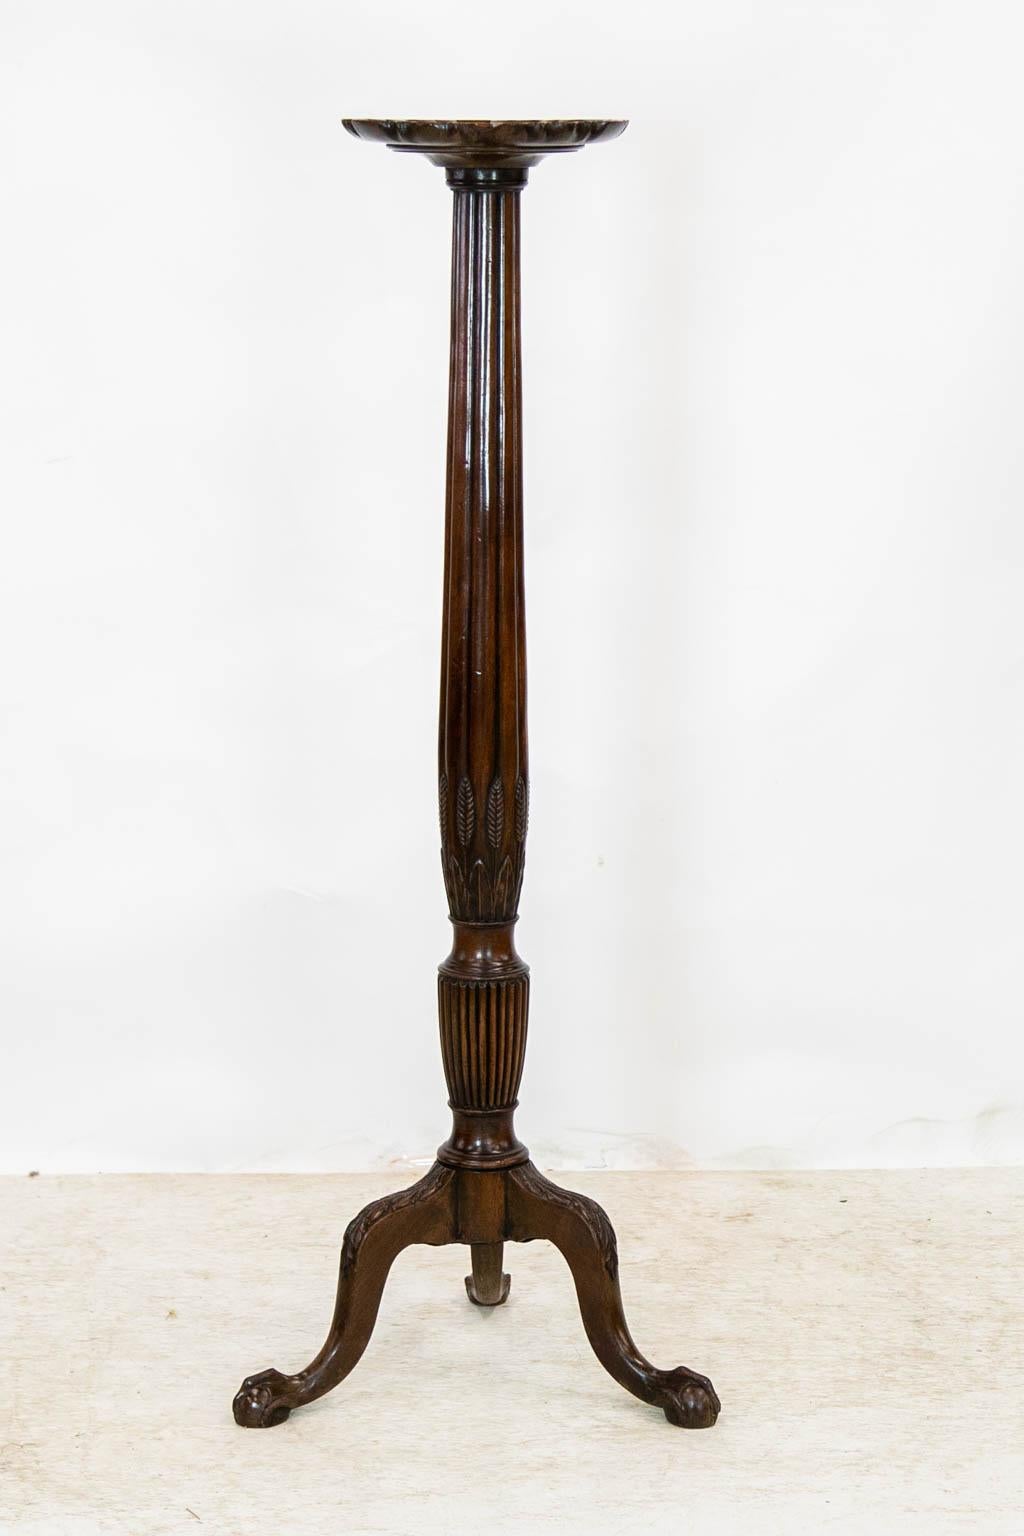 This mahogany English plant stand has a shaped piecrust molded edging. The main stem is carved with heavy reeding. The lower stem is carved with smaller reeding. The legs are carved with acanthus leaves on the knees and terminate in ball and claw